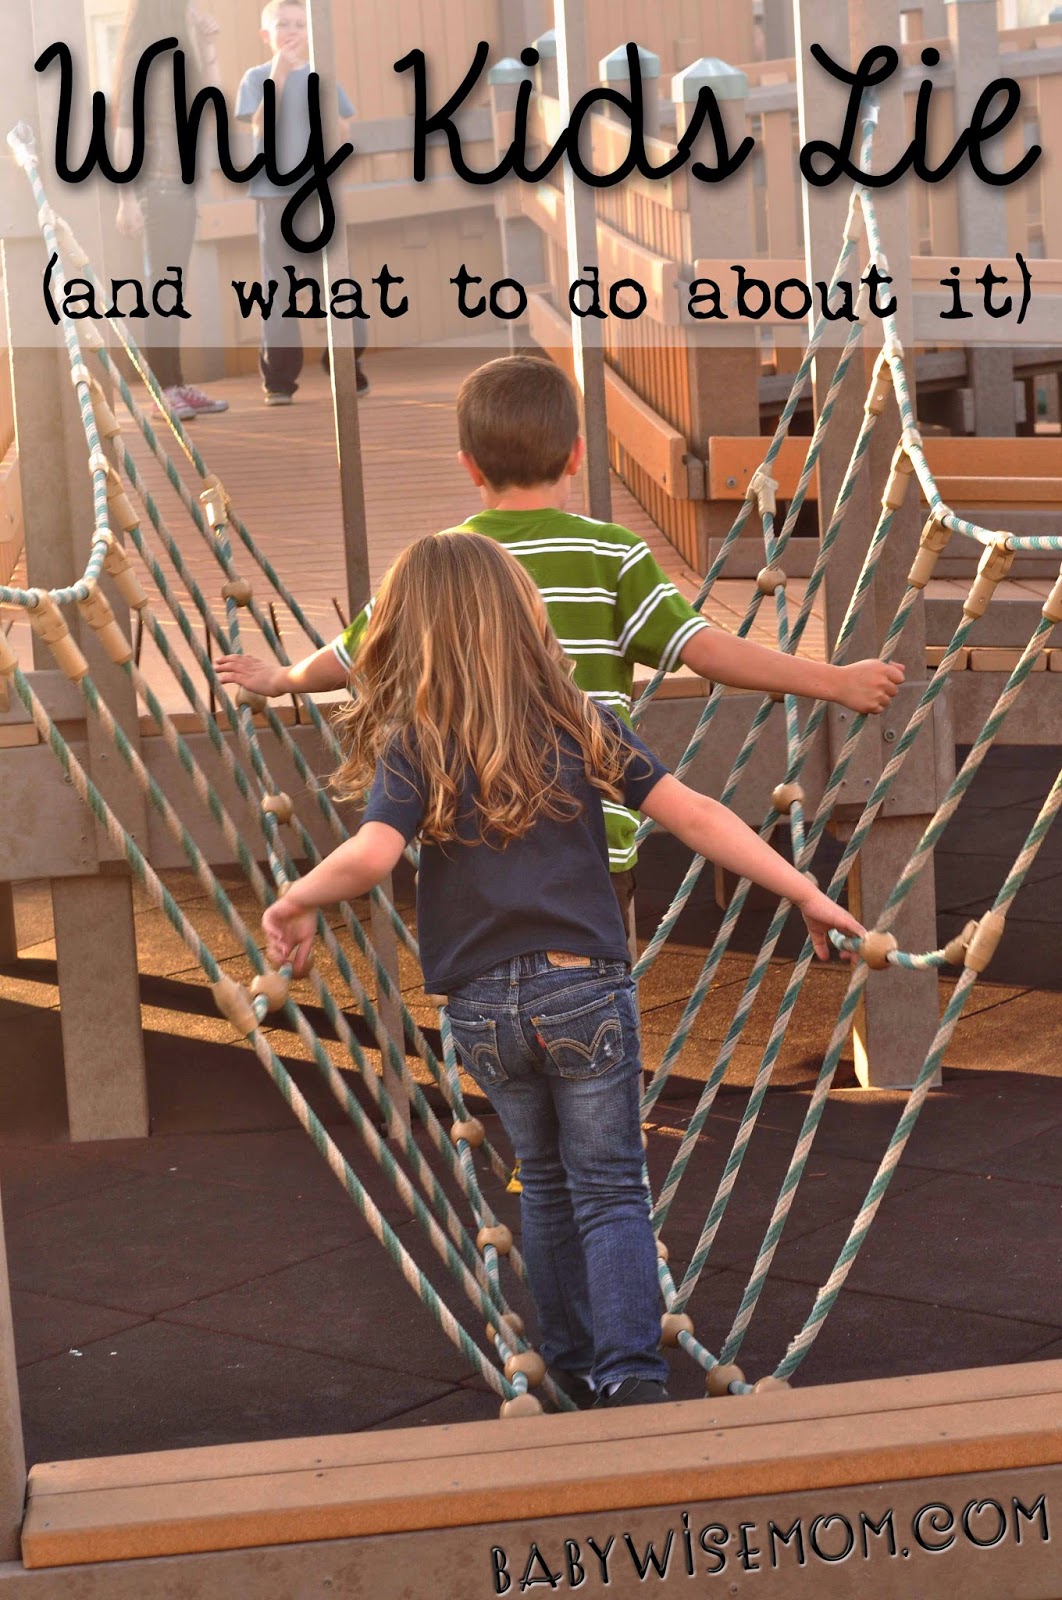  When kids lie, and what to do about it (click to read)